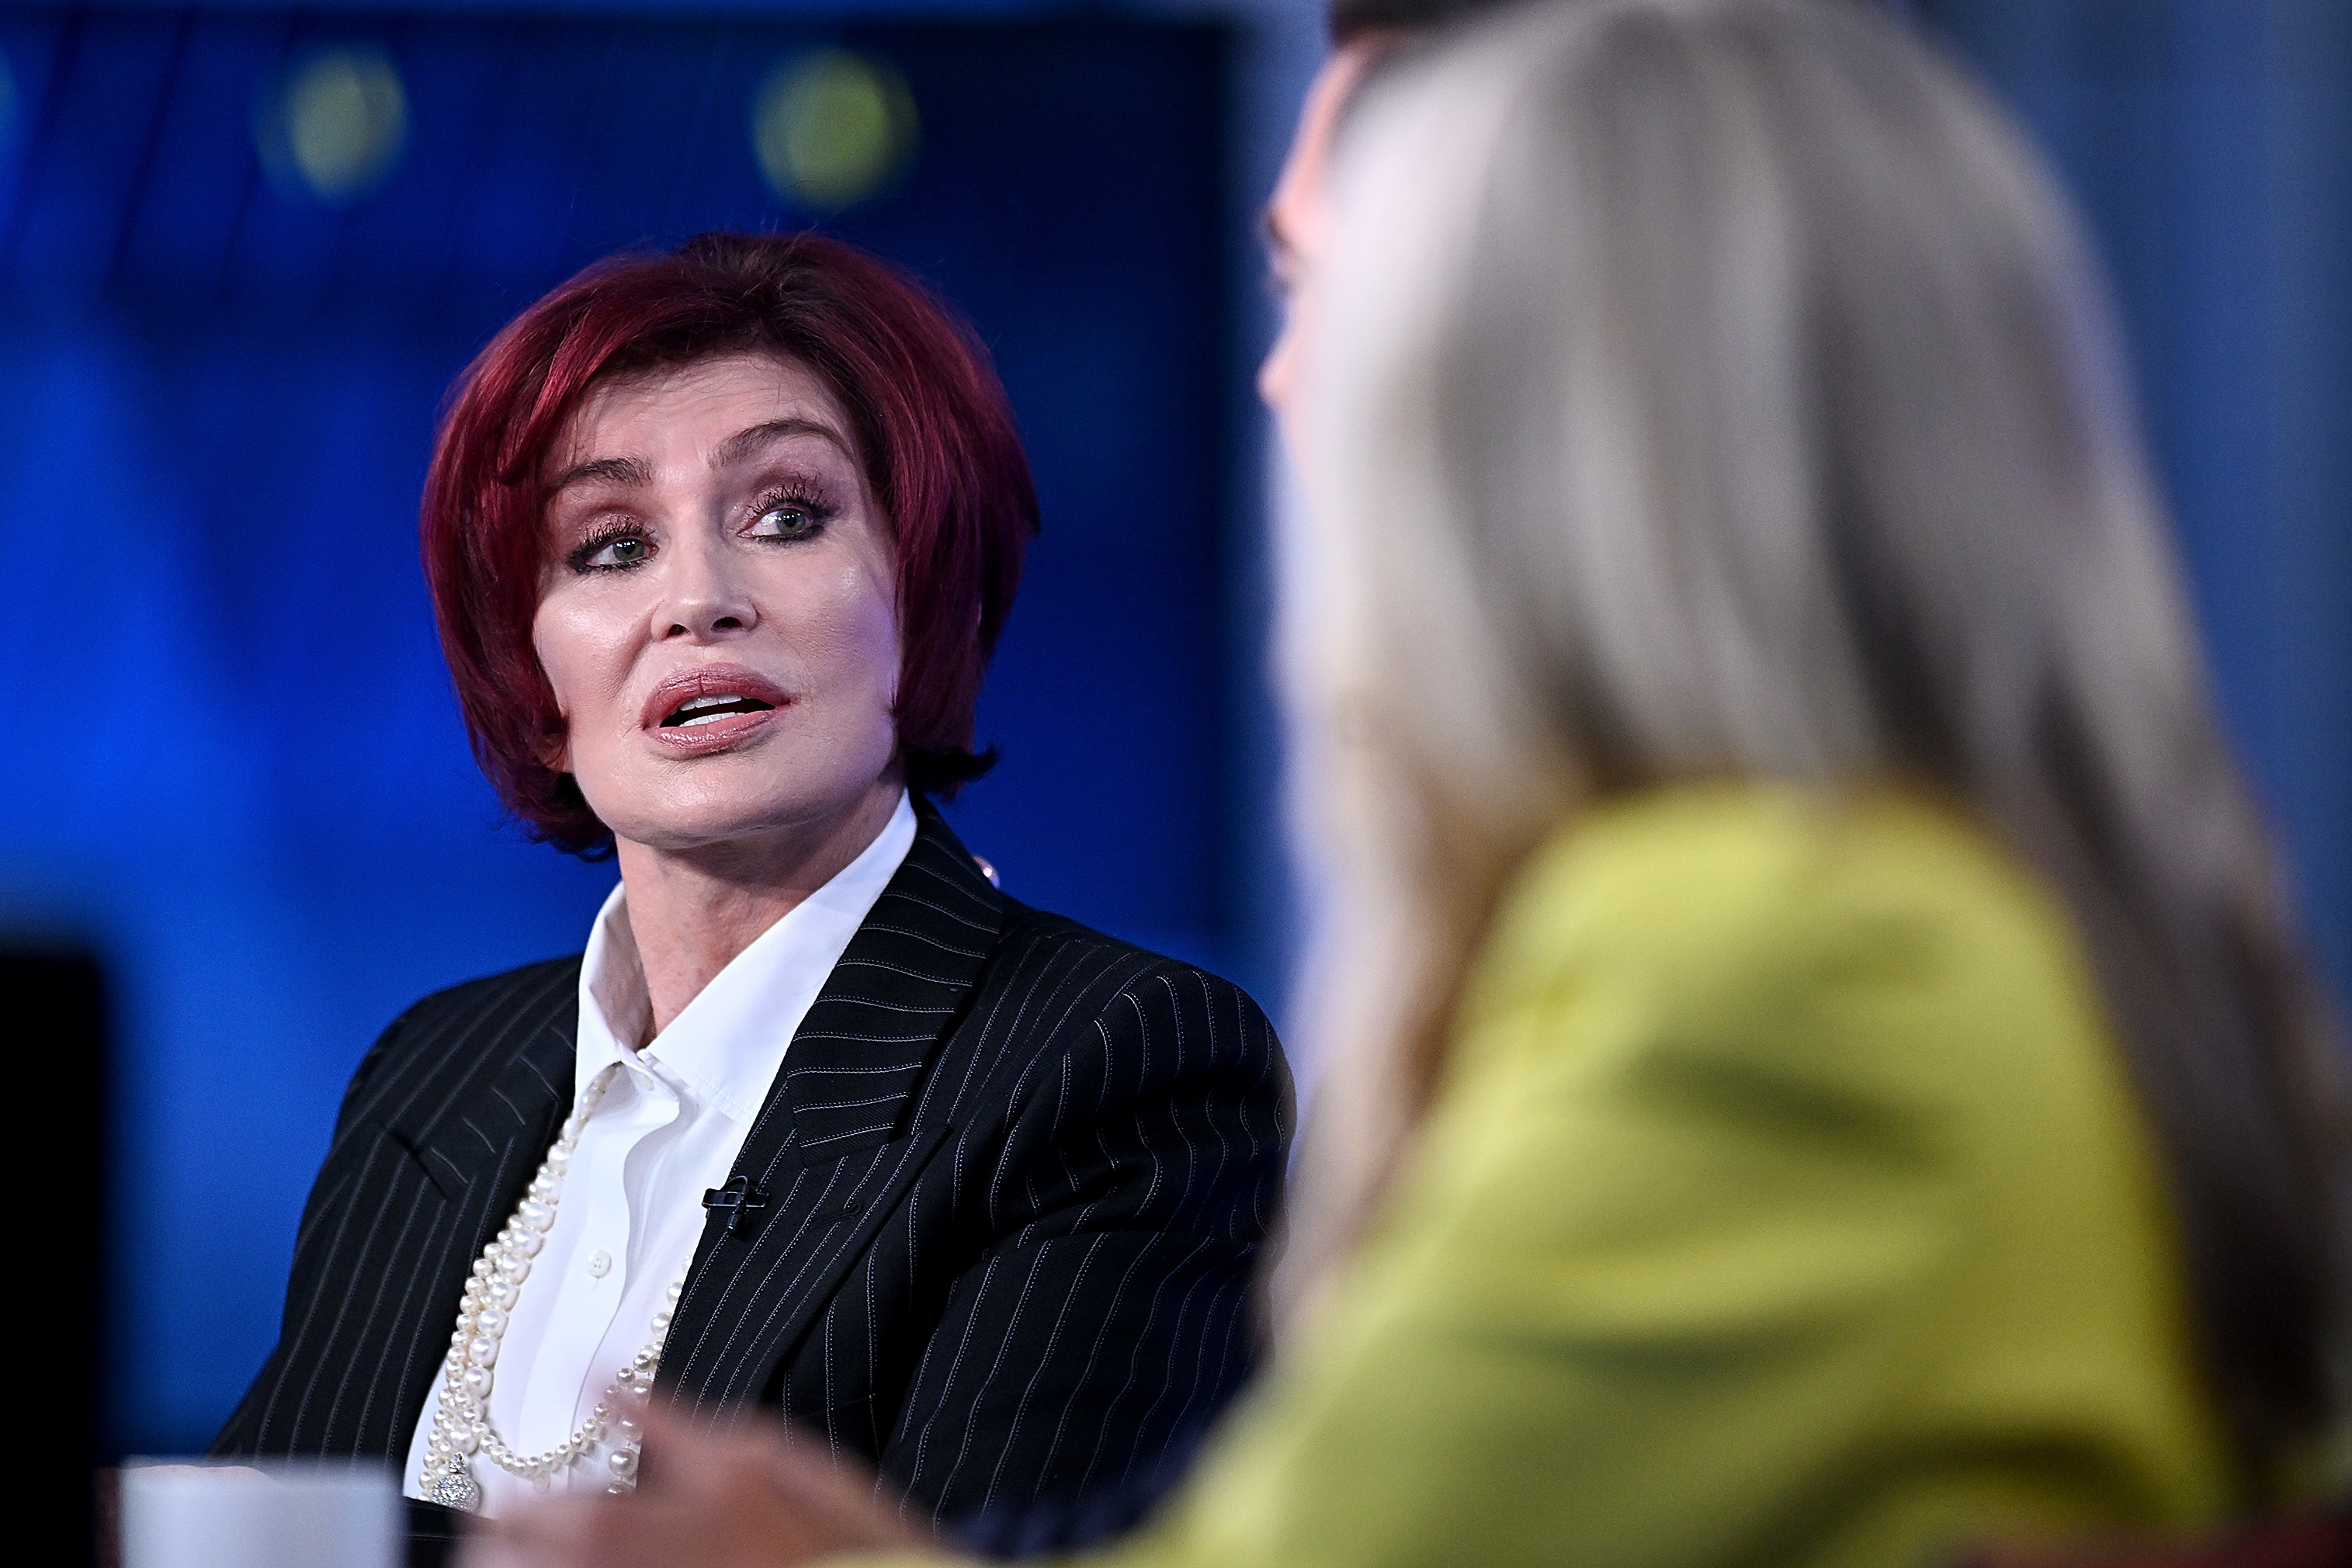 Close-up of Sharon wearing a suit jacket and pearls as she speaks to another person onstage